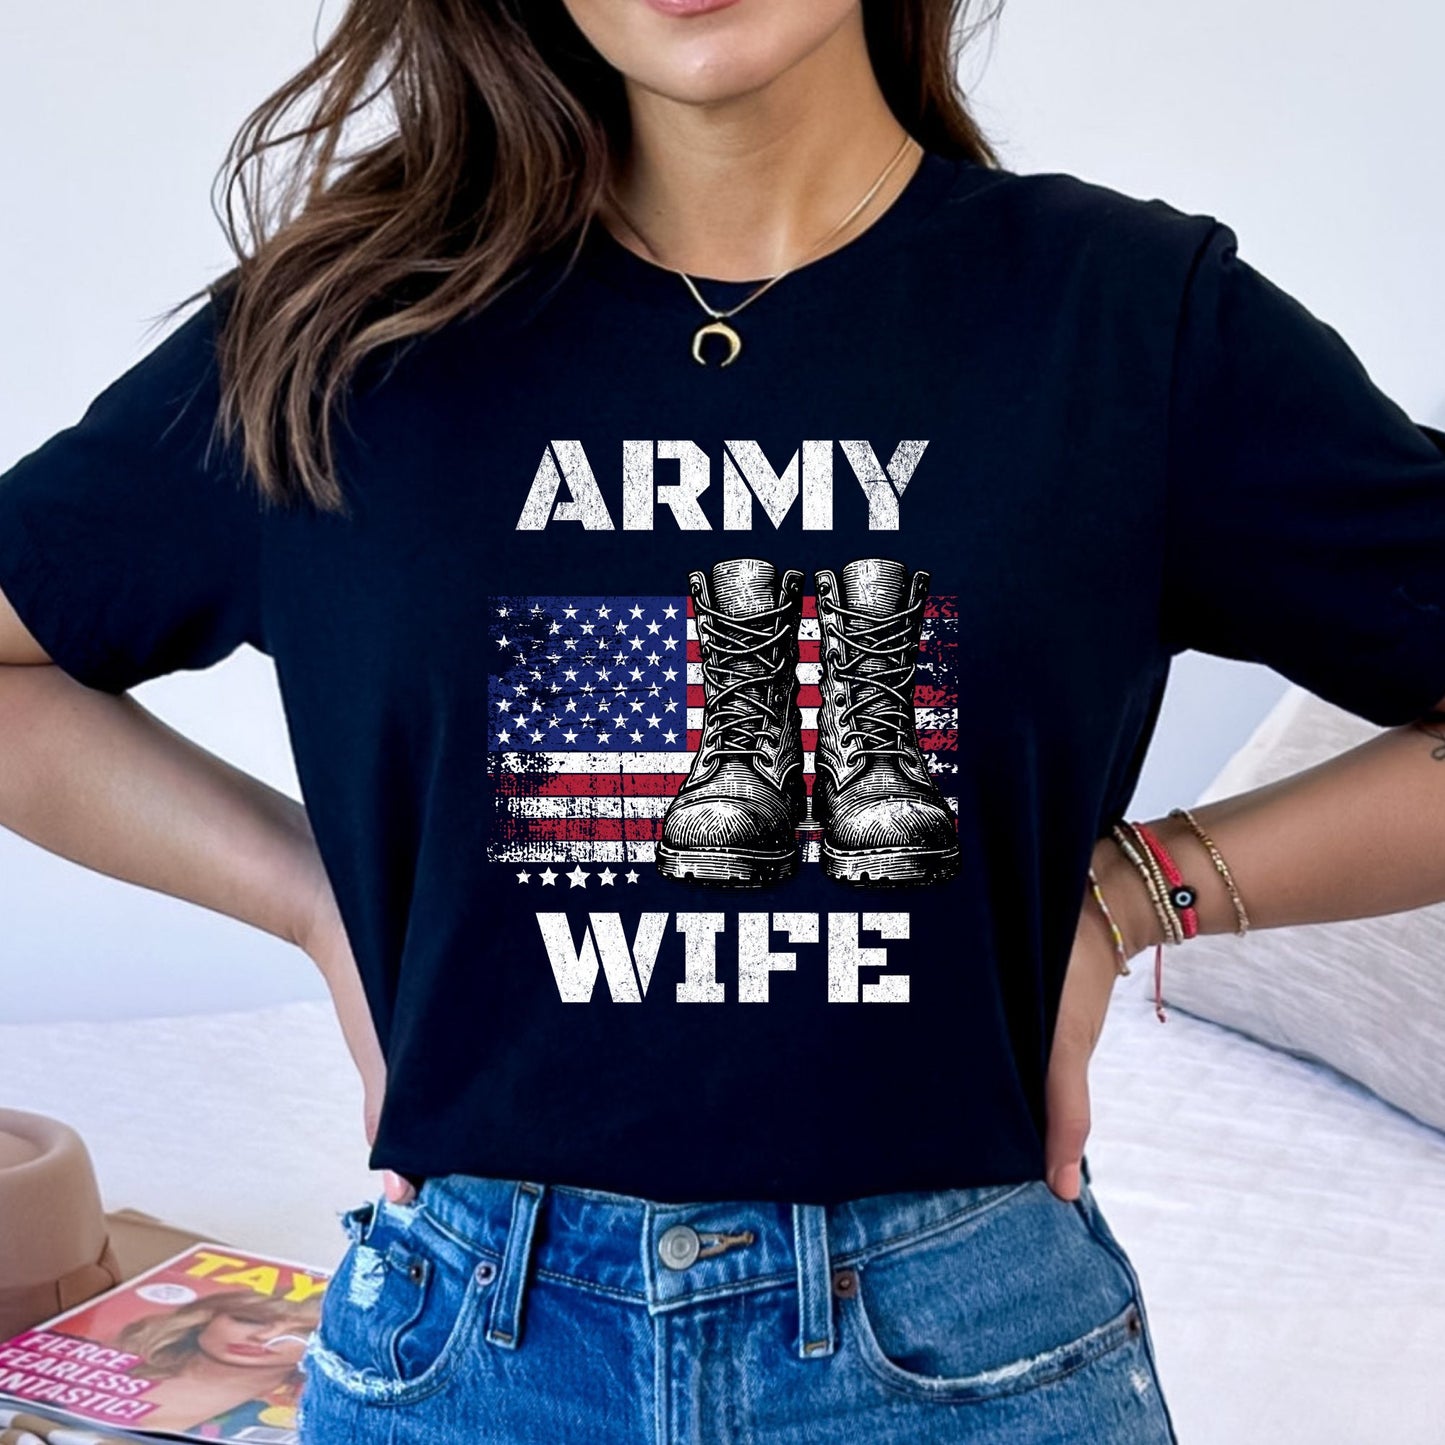 Army Wife Vintage American Flag and Boots T-Shirt, Patriotic Military Shirt - Mardonyx T-Shirt XS / Solid Black Blend